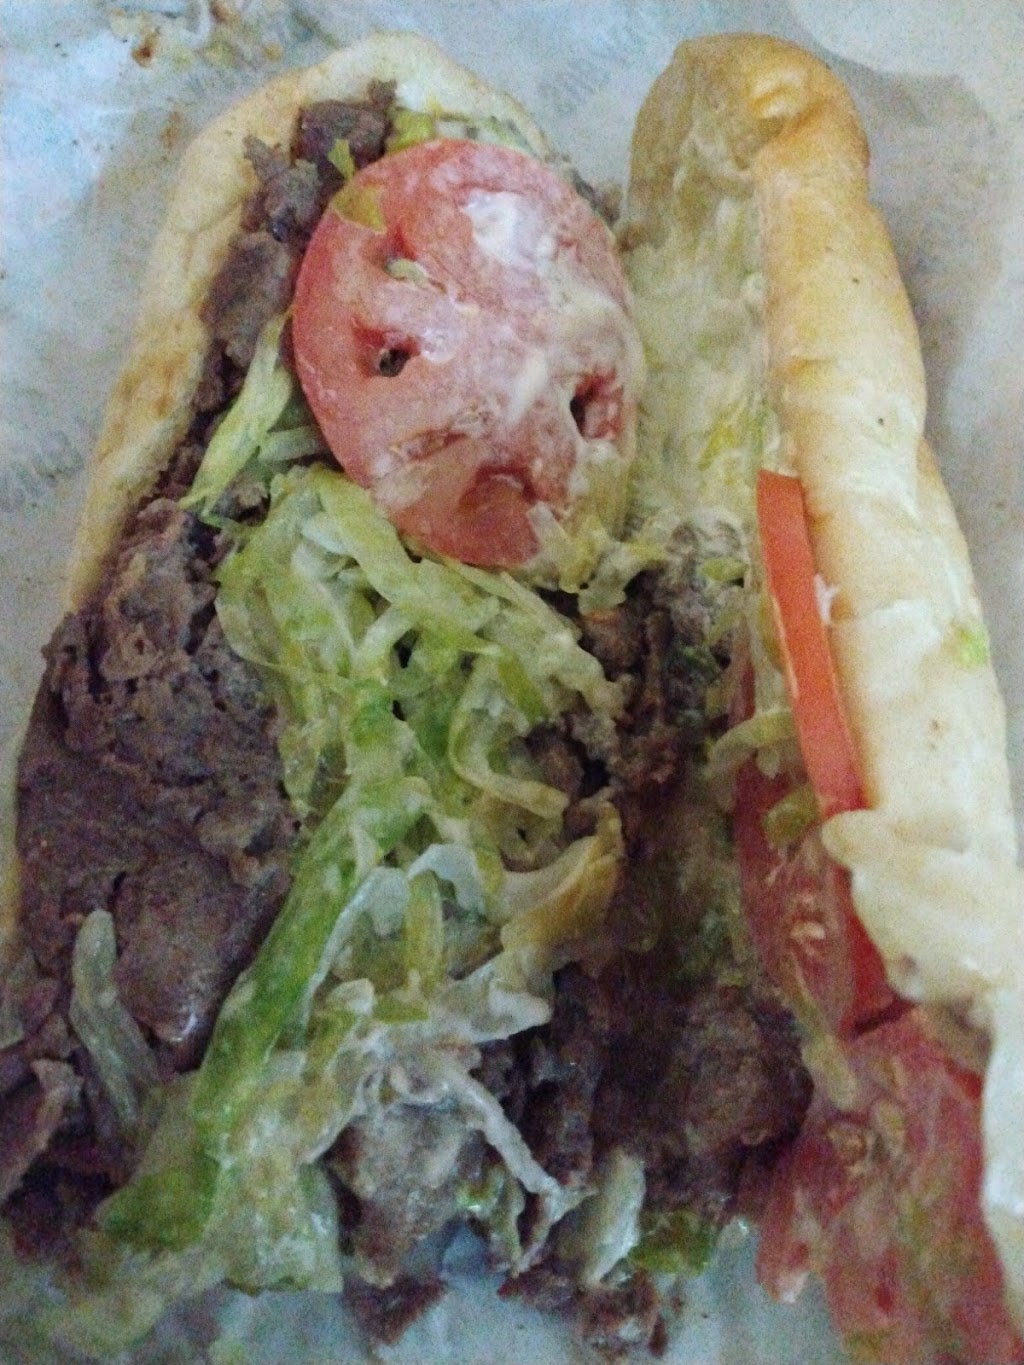 Jersey Mikes | 1165 E Cumberland St Suite 124, Dunn, NC 28334, USA | Phone: (910) 550-1515